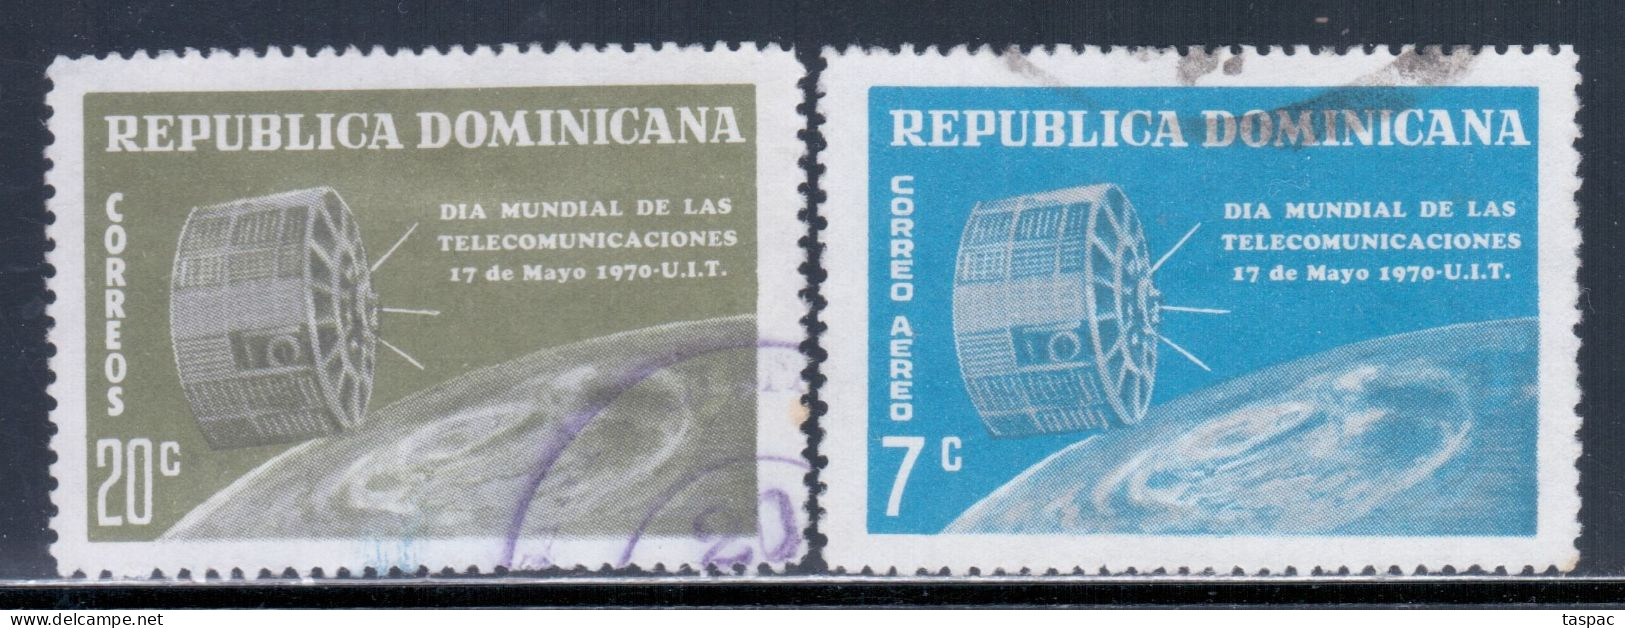 Dominican Republic 1970 Mi# 960-961 Used - World Telecommunications Day / Communications Satellite / Space - America Del Nord